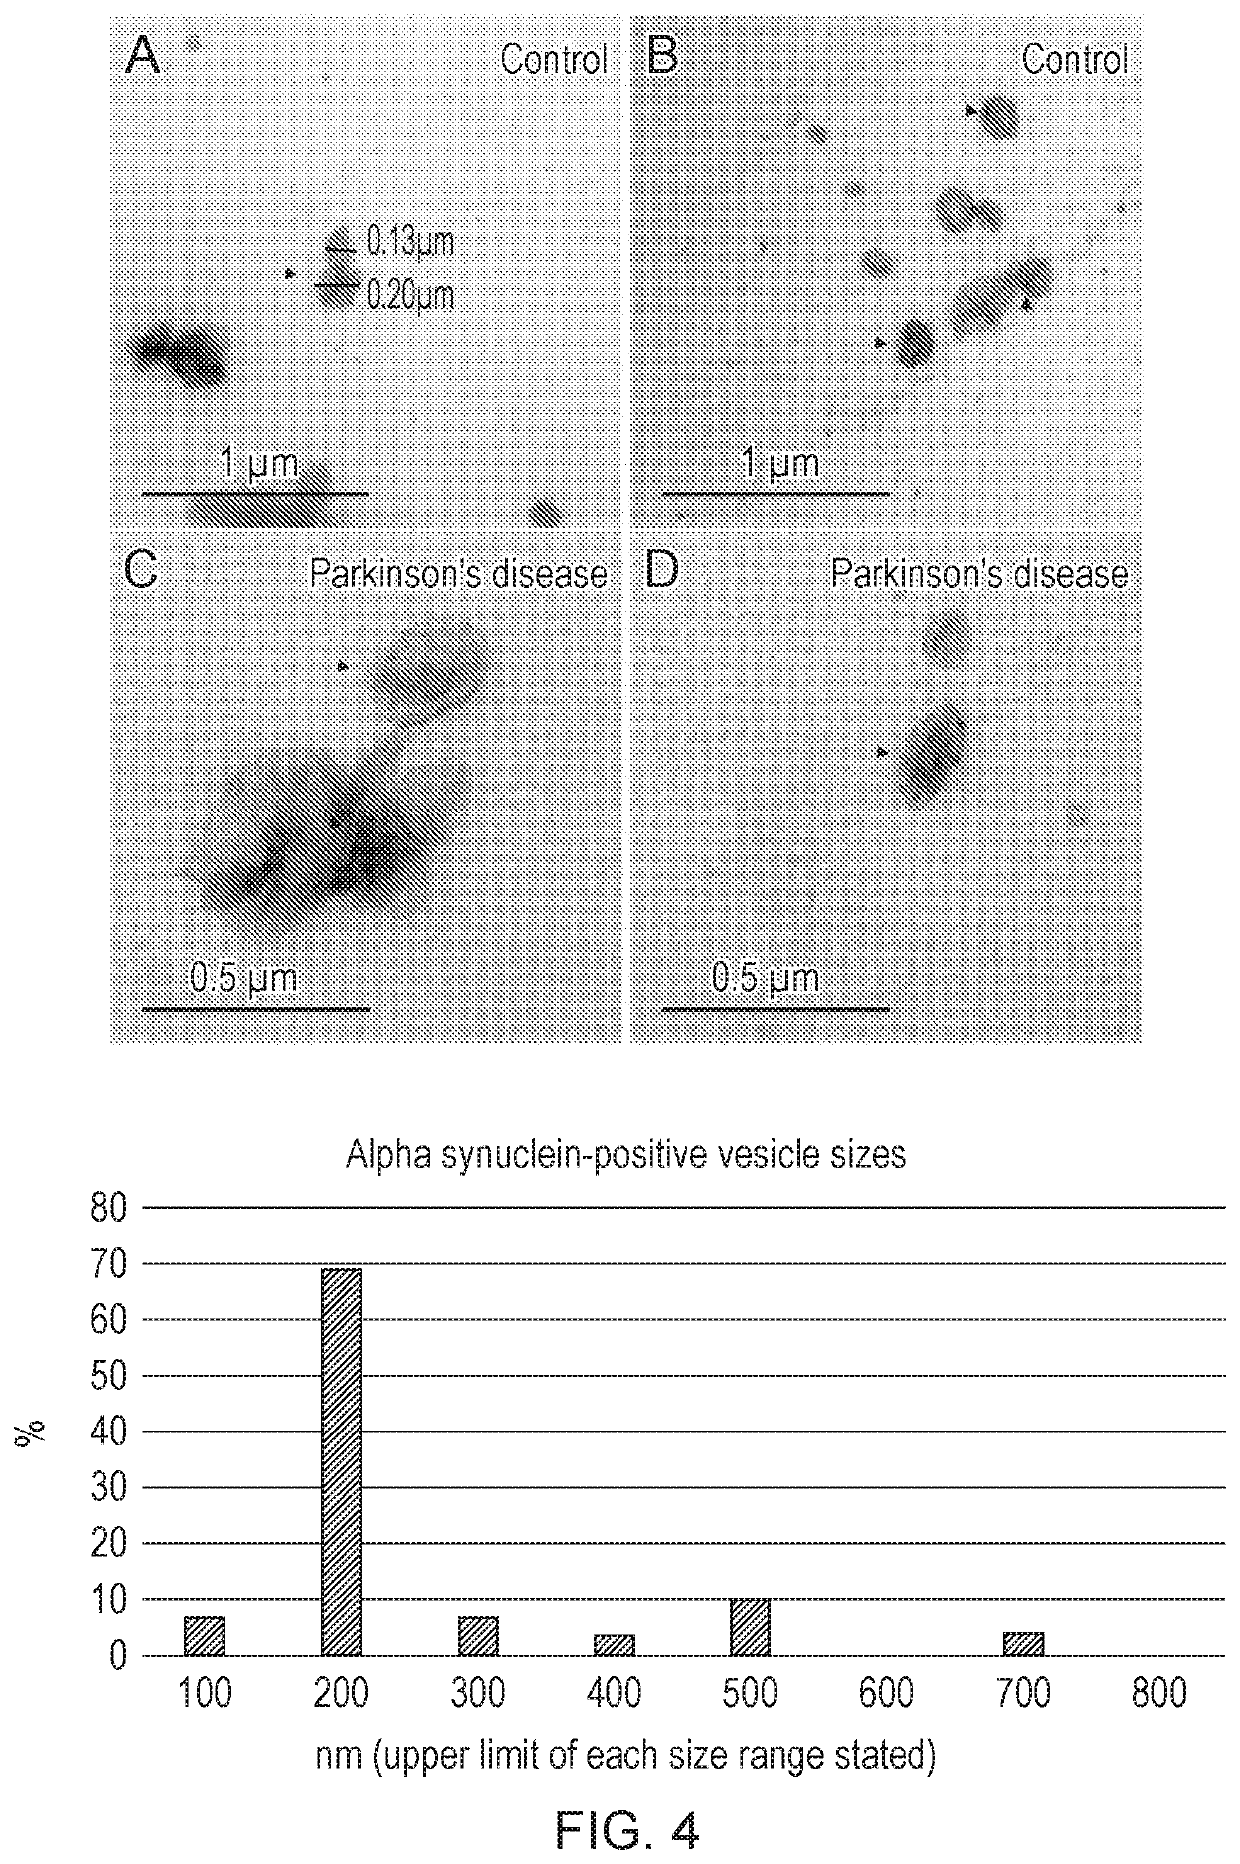 Detection of pathological protein aggregation